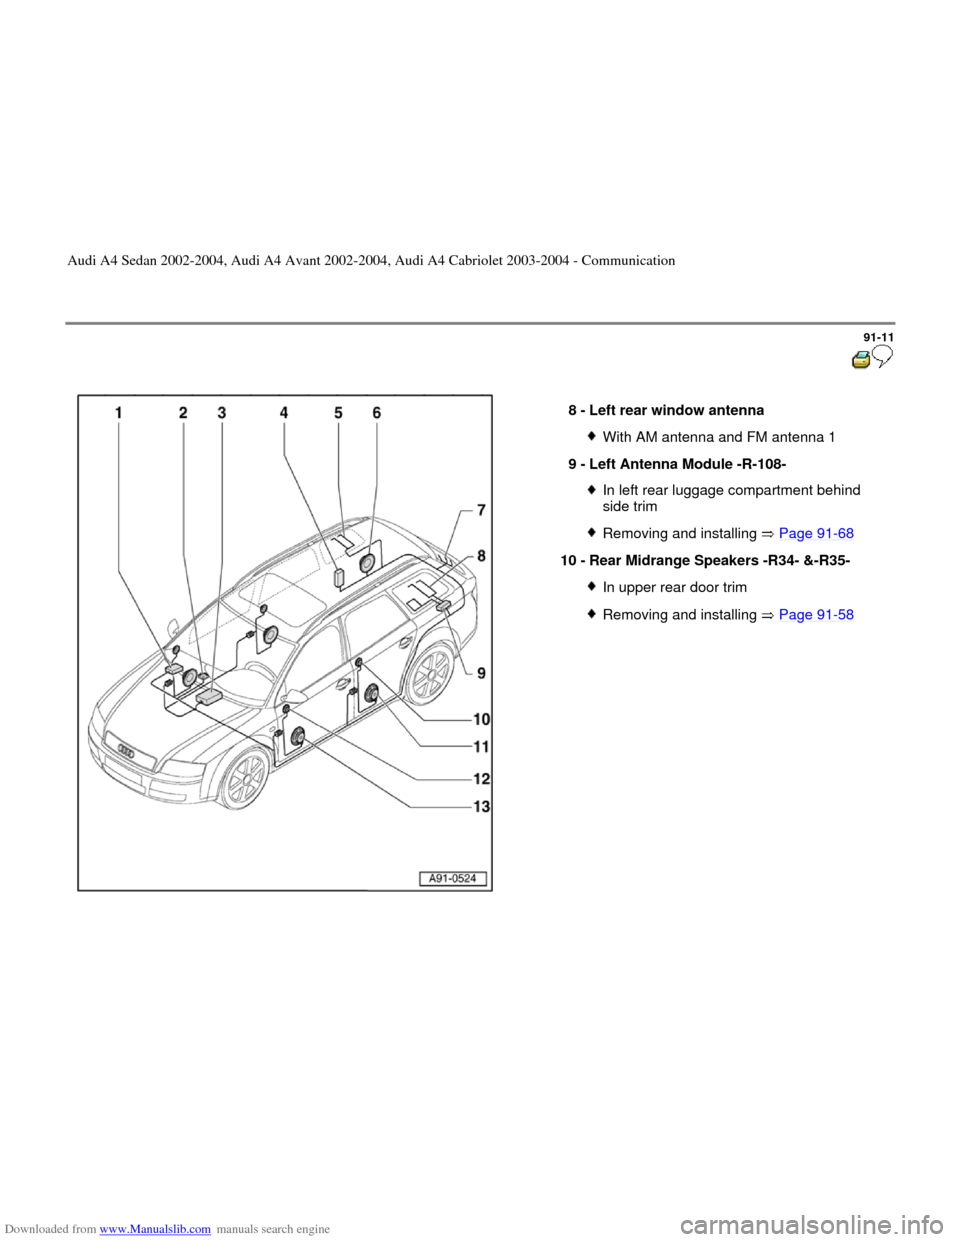 AUDI A4 2002 B5 / 1.G Radio System General Information Downloaded from www.Manualslib.com manuals search engine 91-11
 
  
8 - 
Left rear window antenna 
With AM antenna and FM antenna 1
9 - 
Left Antenna Module -R-108- In left rear luggage compartment be